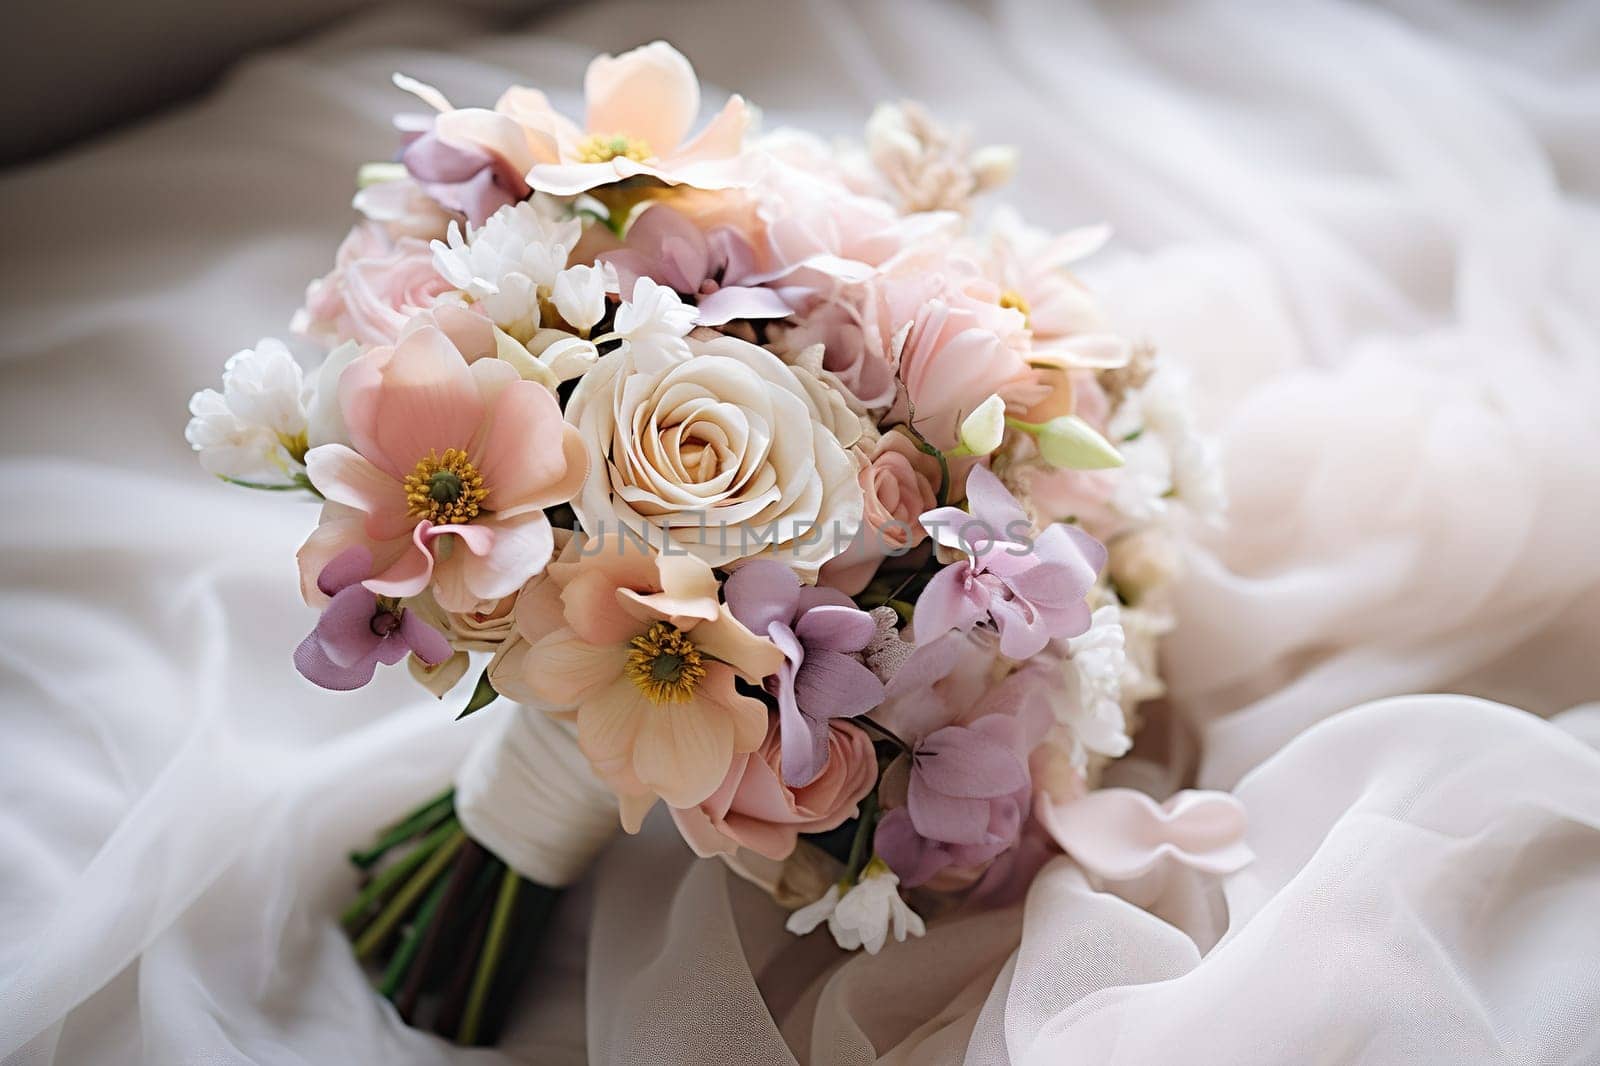 A luxurious wedding bouquet of the bride with white roses lies on light sheets. Wedding day concept.